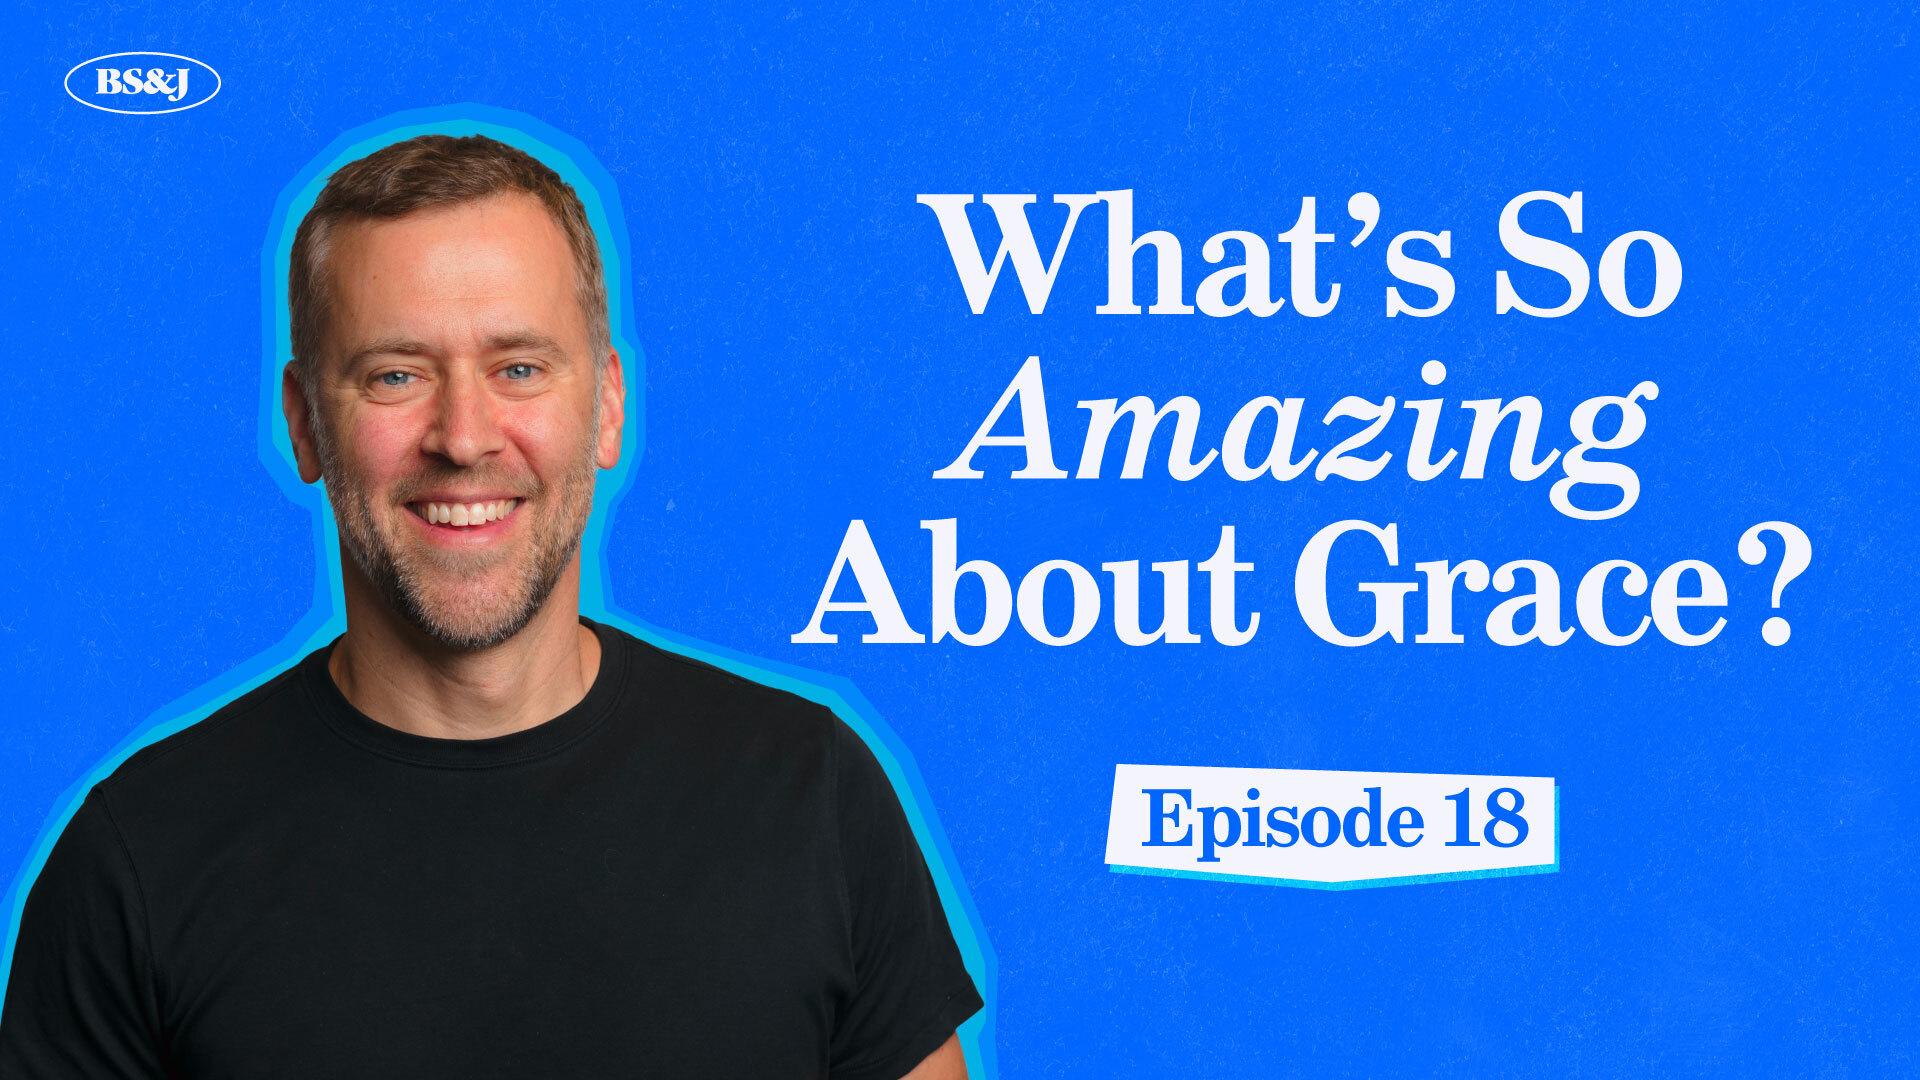 Episode 18 – What’s So Amazing About Grace?